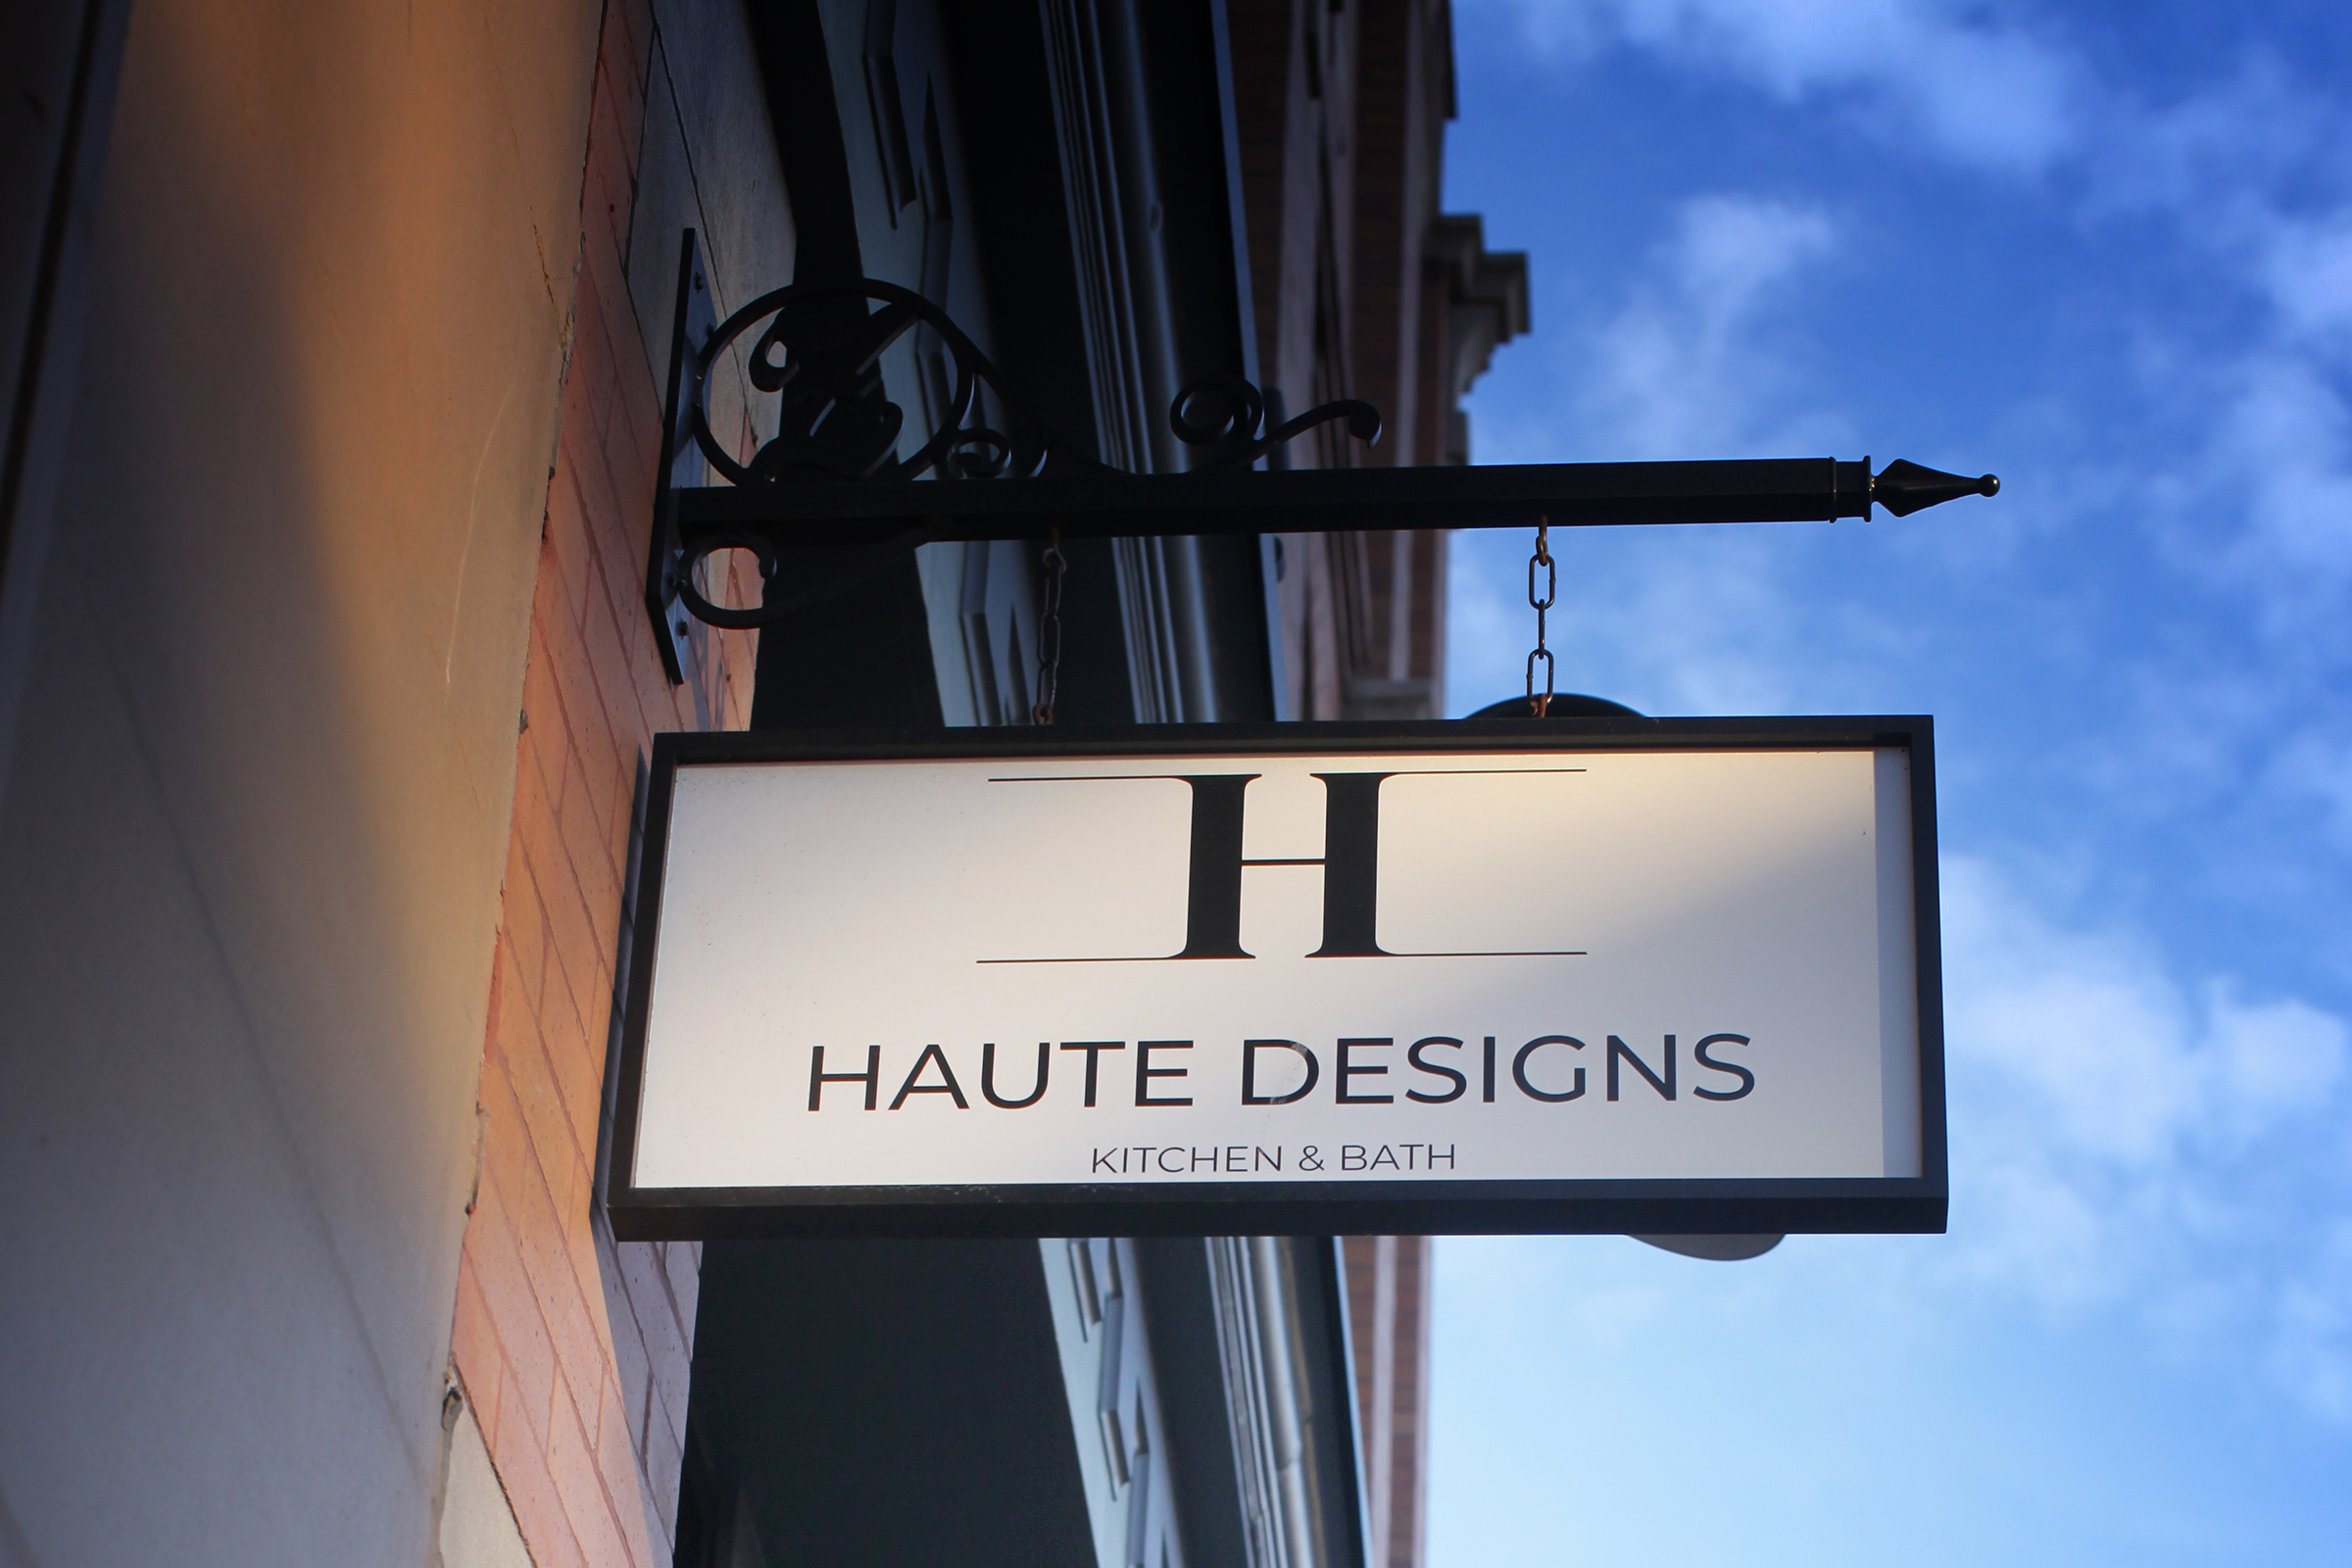 A photo of the sign outside at Haute Designs. It has an "H" designed logo, reading "Haute Designs / Kitchen & Bath" underneath.